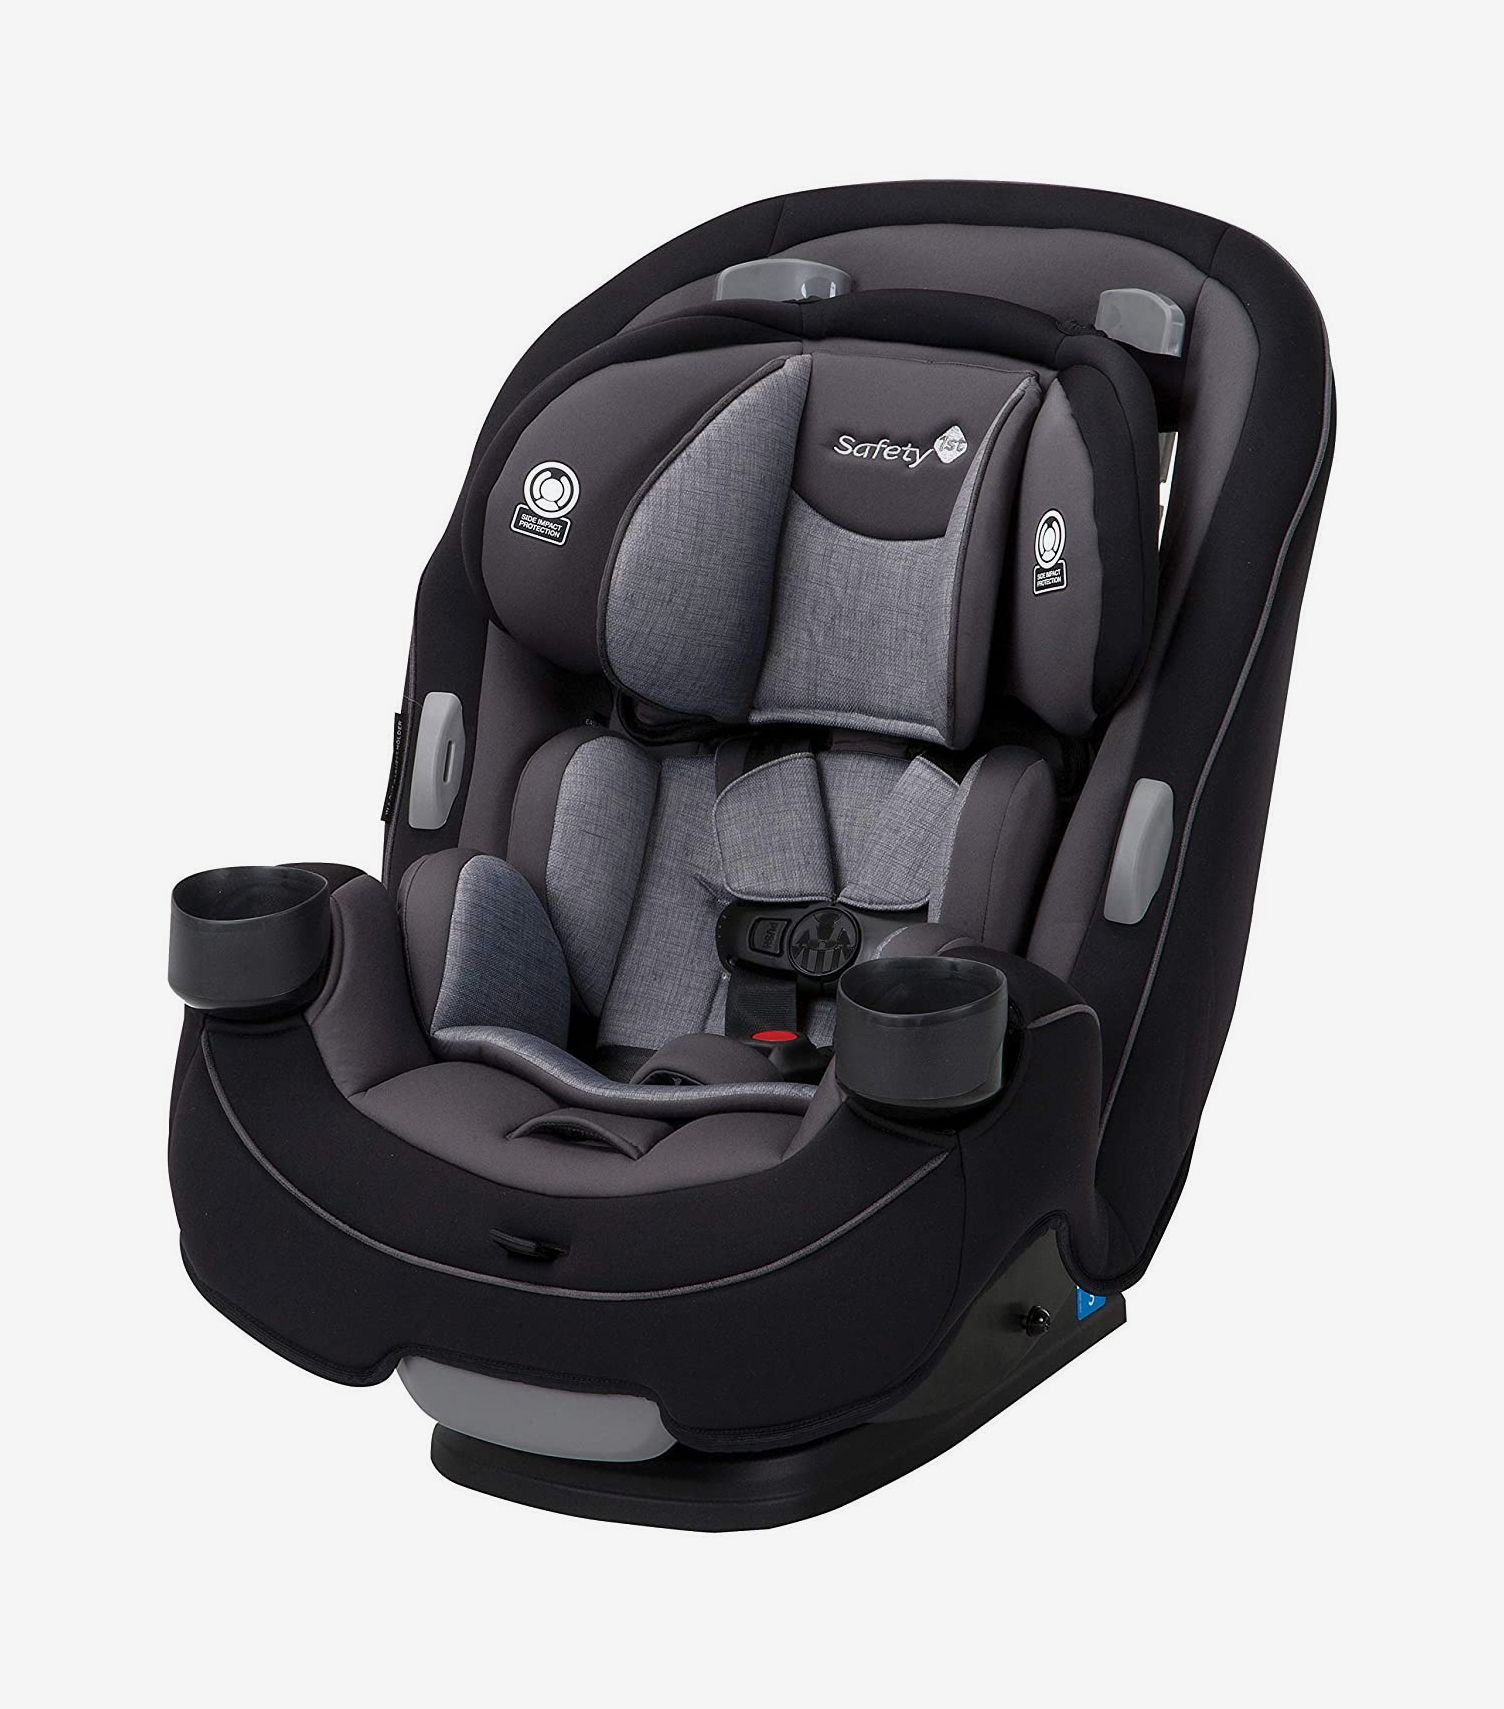 25 Best Infant Car Seats And Booster 2020 The Strategist - Top Infant Car Seat 2020